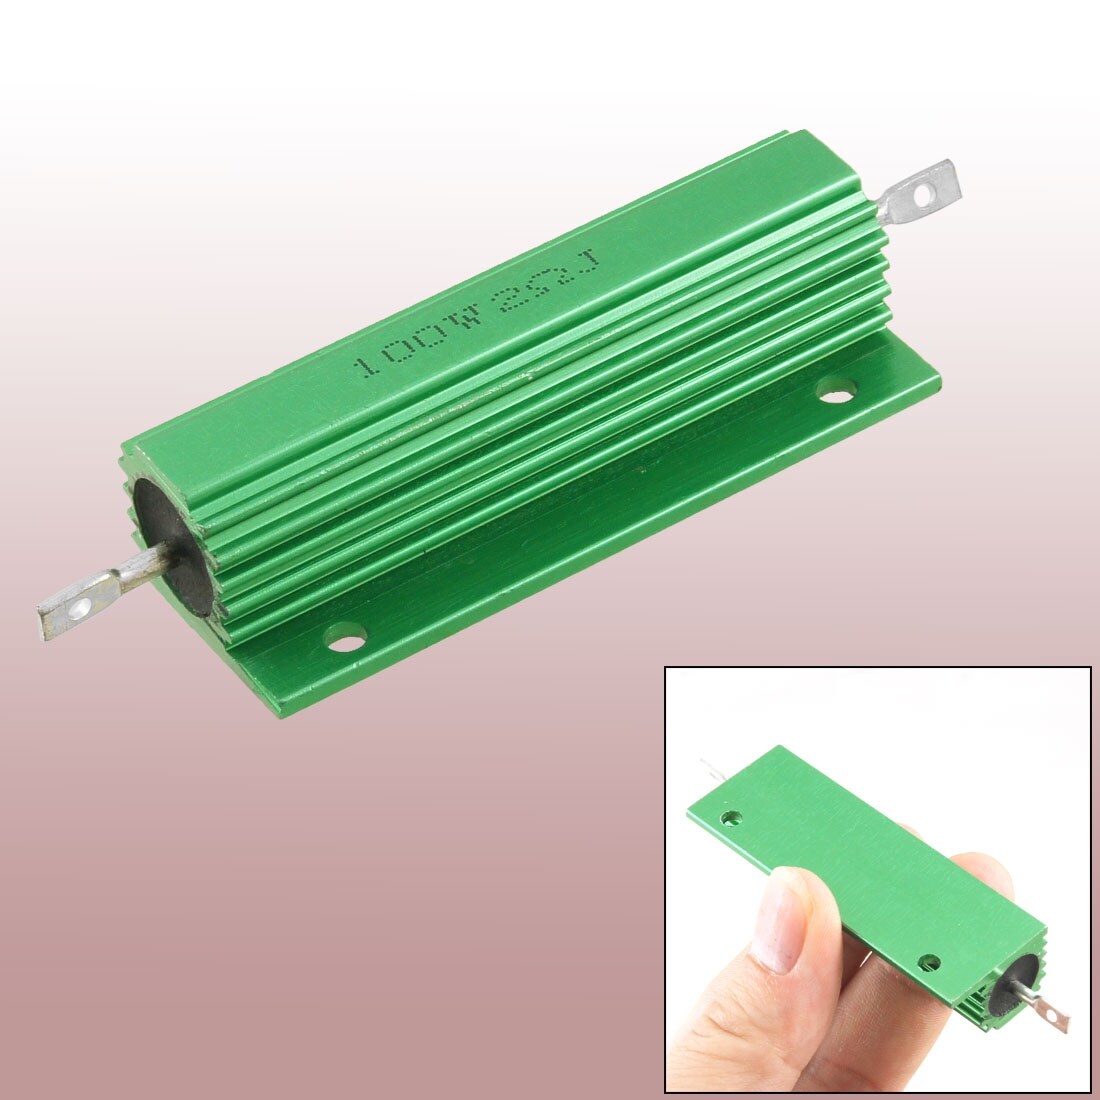 Chassis Mounted 100W 2 Ohm 5% Aluminum Case Wirewound Resistor Yuqnk - Green